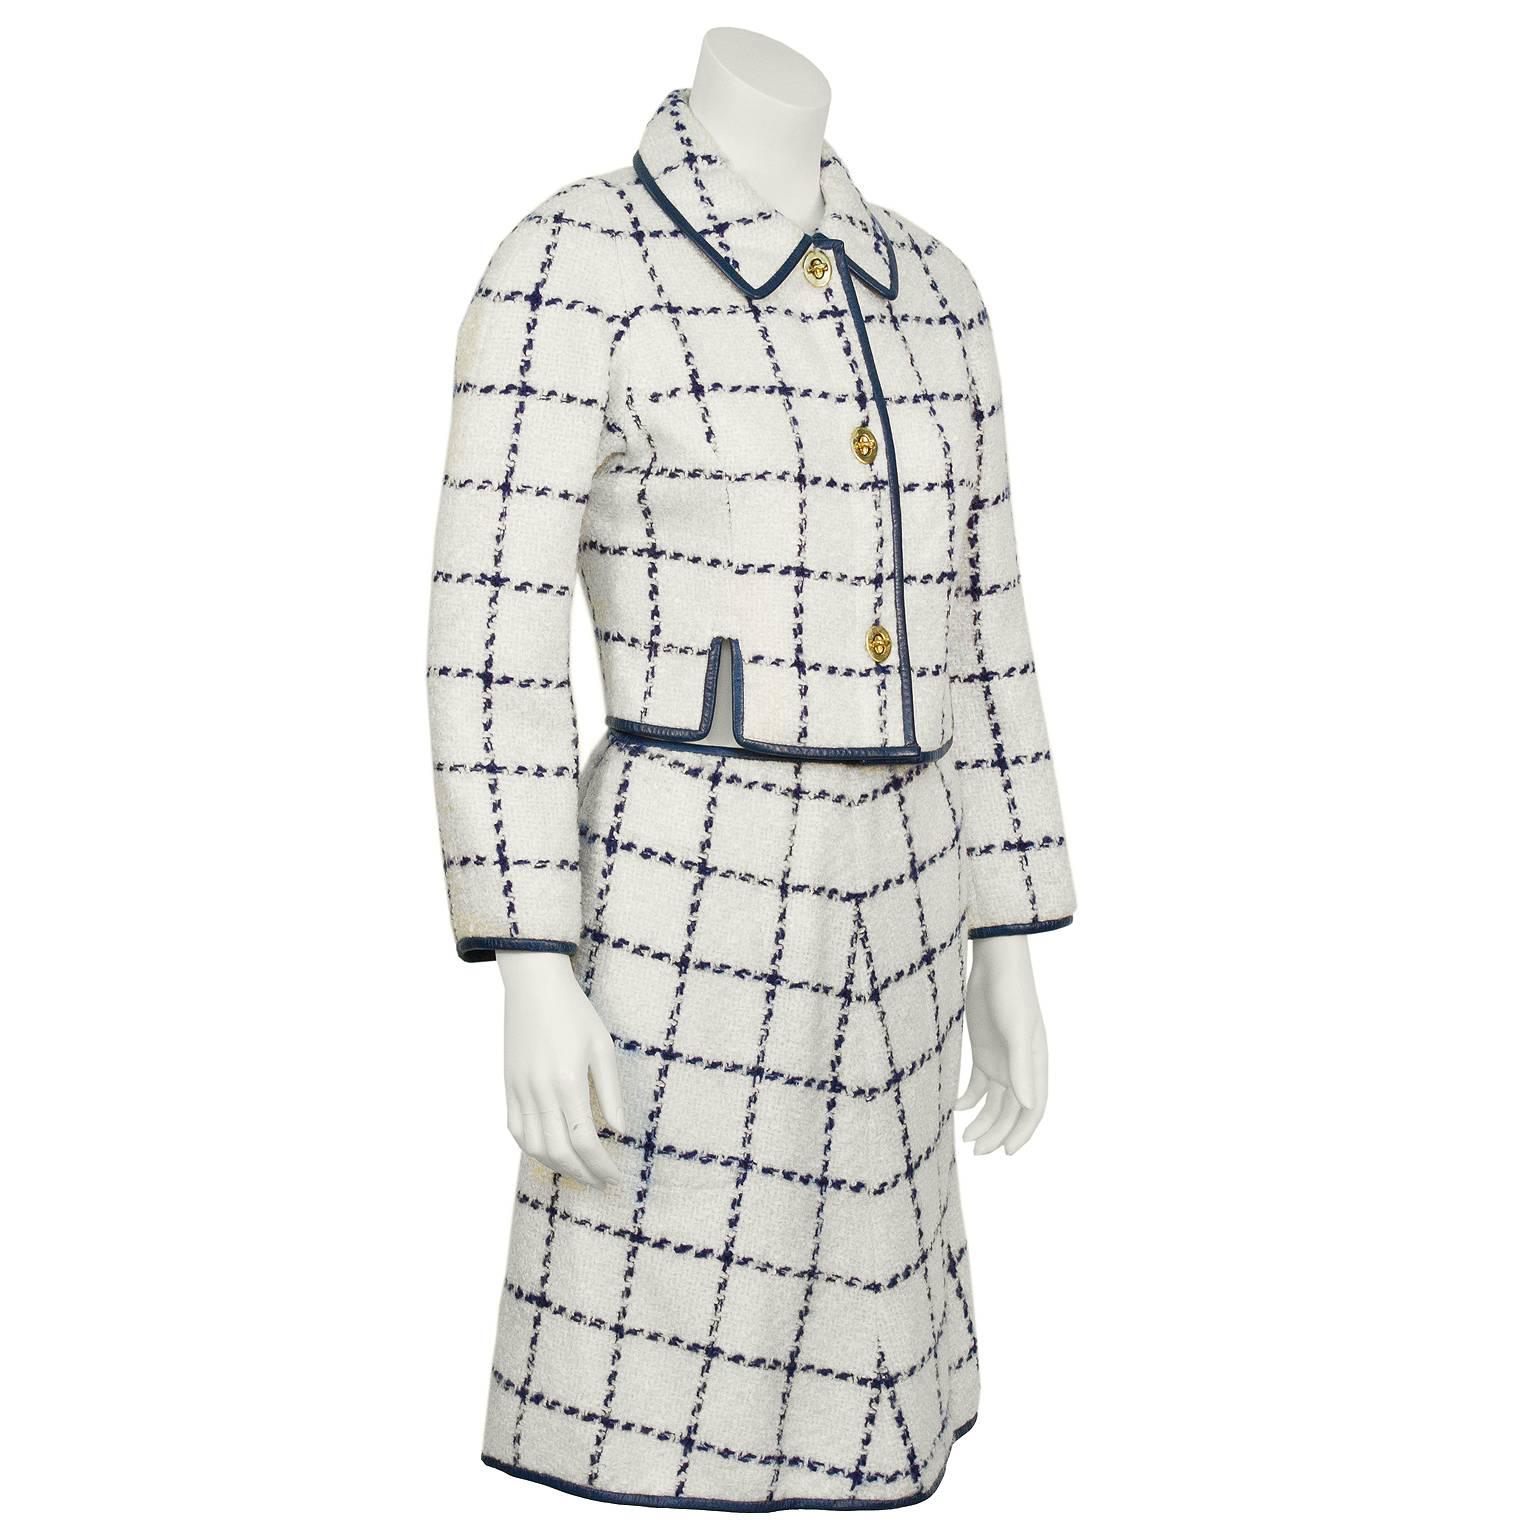 Adorable 1960’s Bonnie Cashin cream and navy windowpane boucle wool suit with navy leather trim. The cropped jacket has a pointed style collar and closes with 3 turn lock closures, made iconic by Cashin and famously used on her designs. The skirt is